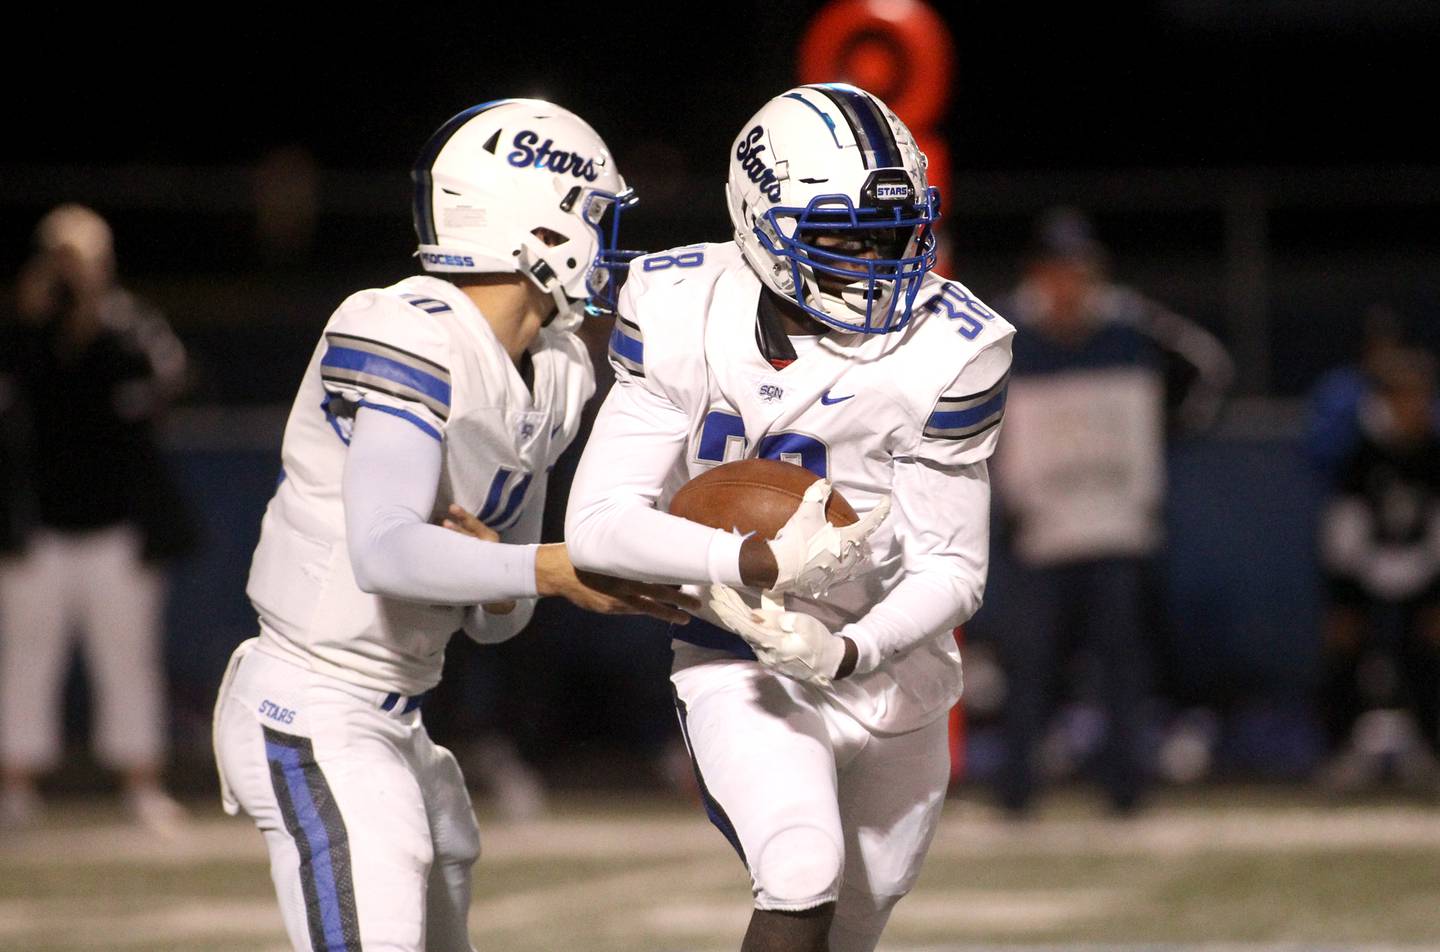 St. Charles North quarterback Ethan Plumb hands the ball off to Joell Holloman during a game at Geneva on Friday, Sept. 23, 2022.